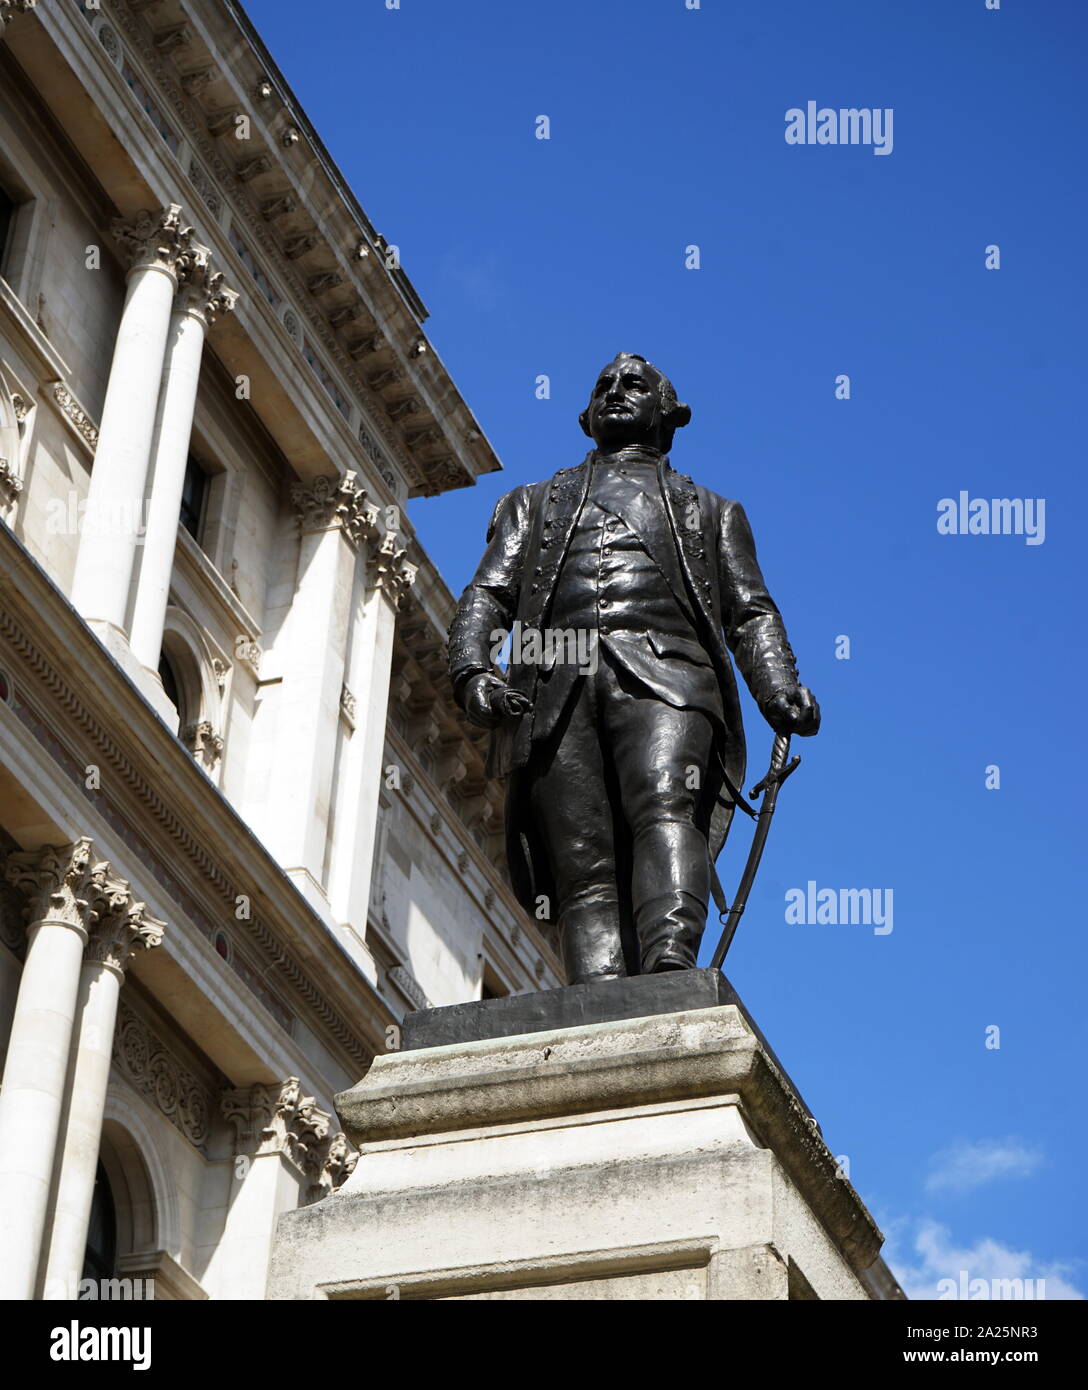 Statue of major-general robert clive. major-general robert clive, 1st baron clive (1725-1774) a british officer and privateer who established the military and political supremacy of the east india company in bengal. Stock Photo